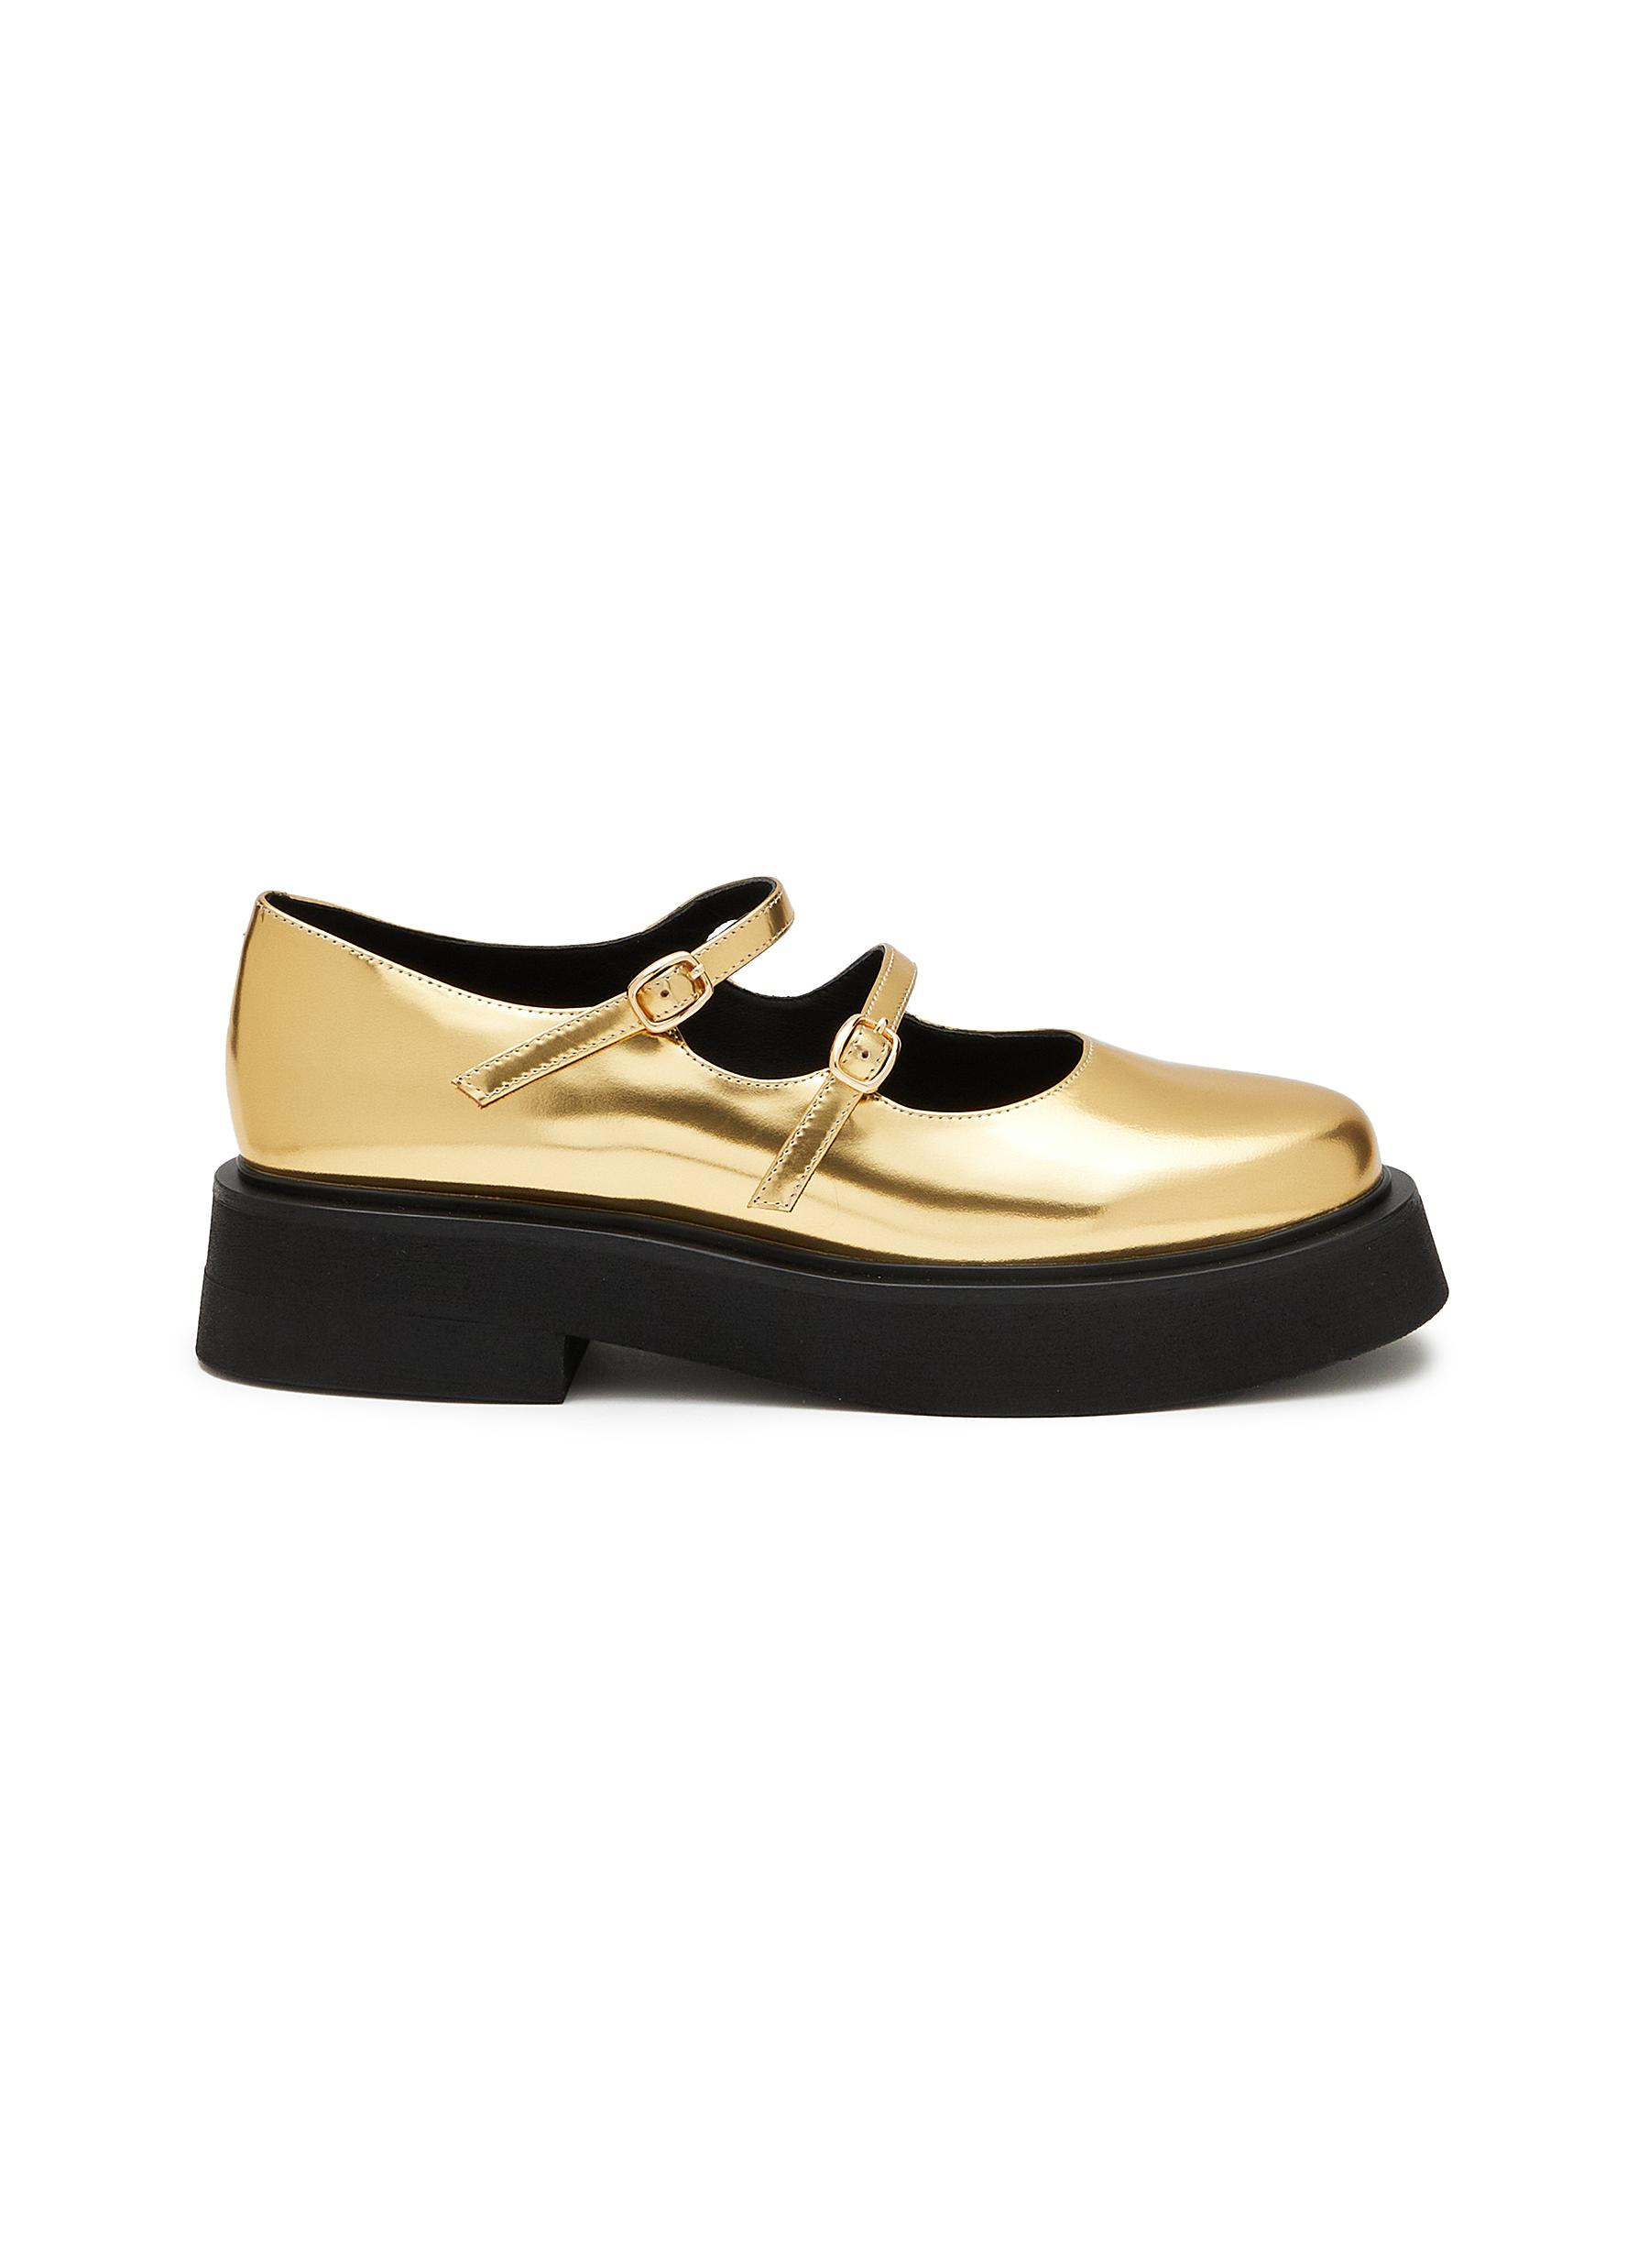 Ember 40 Patent Leather Platform Mary Janes